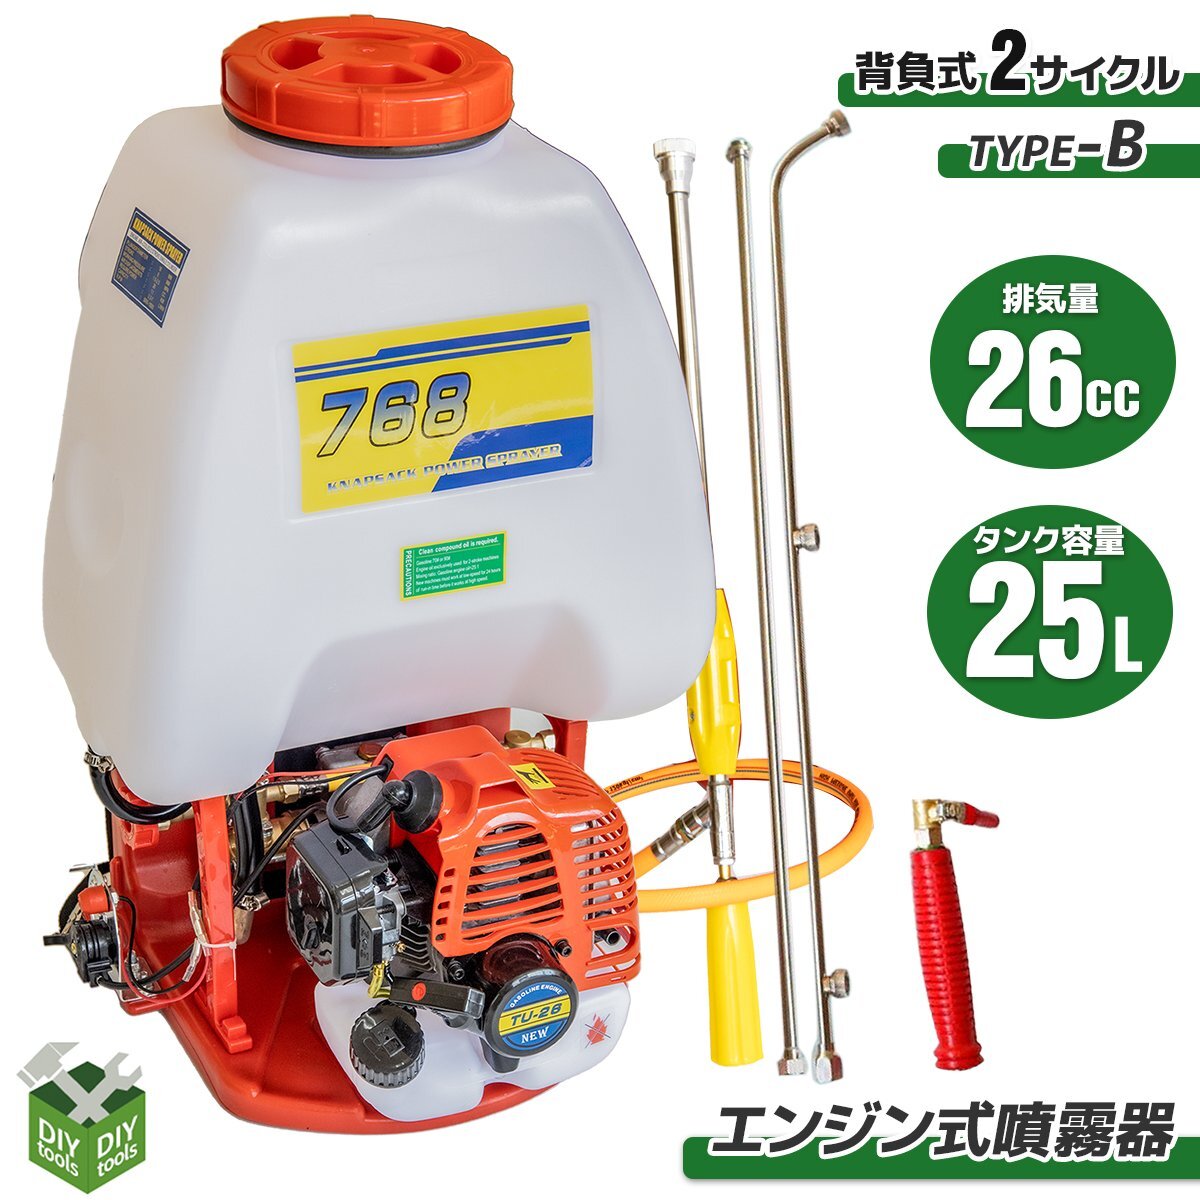  powerful ..2.5mpa engine sprayer 25L shoulder .. type back pack type 25 liter spray machine 2 cycle pump pressure adjustment possible iron ..* three head .. 2 kind nozzle attaching 